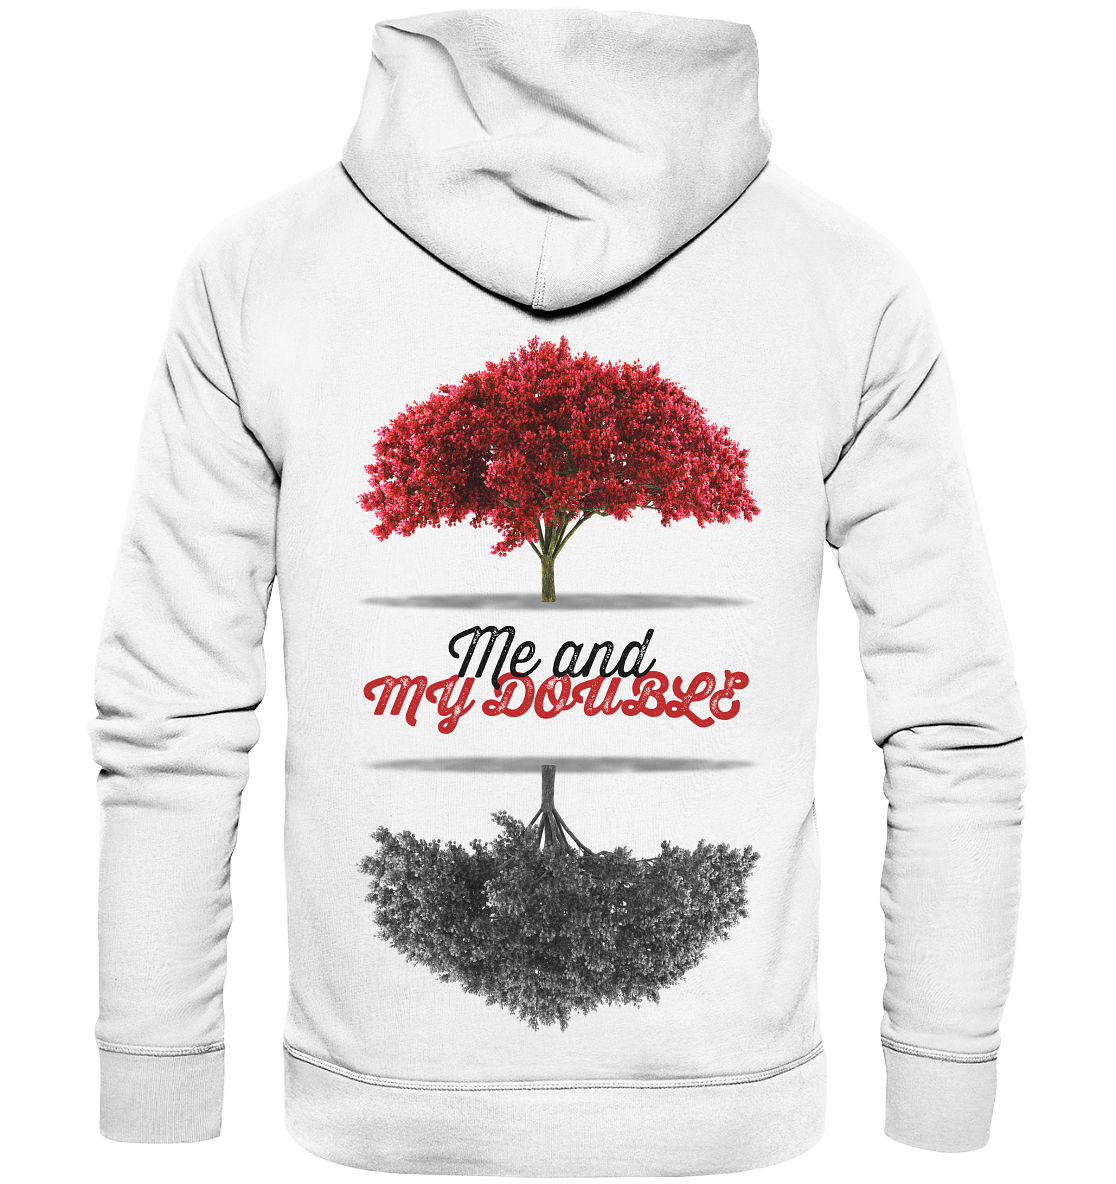 OSA - nature - Organic Fashion Hoodie "Me and my double"